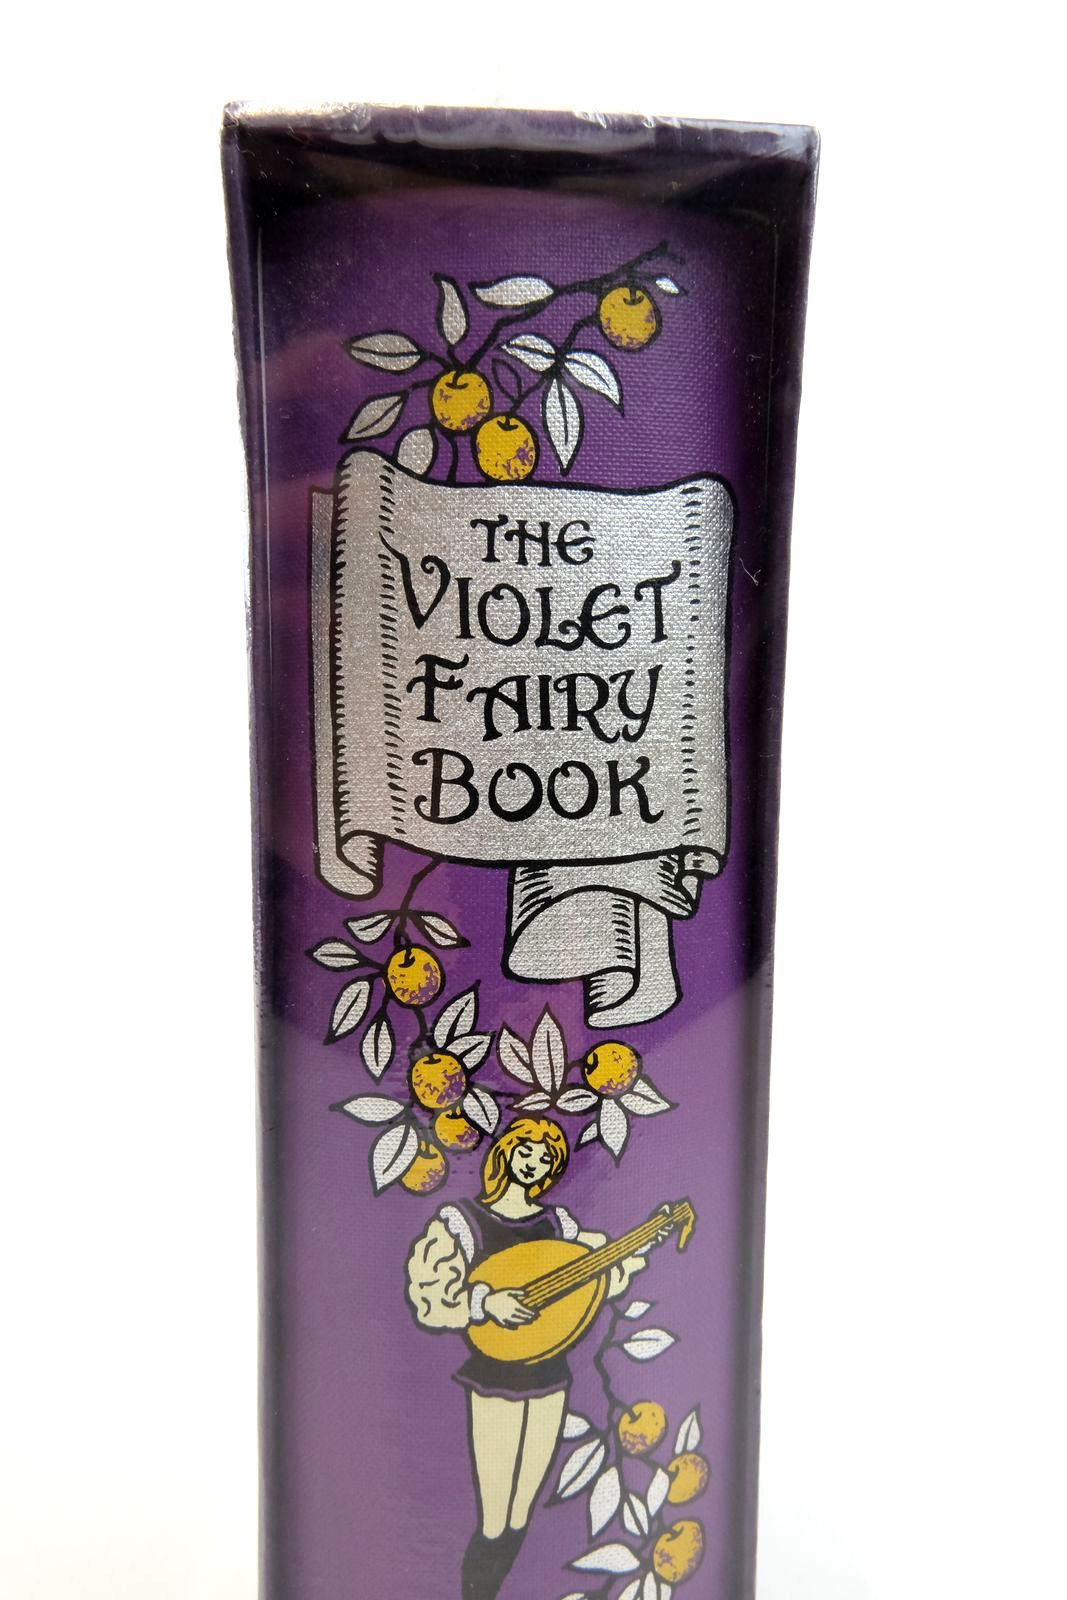 Photo of THE VIOLET FAIRY BOOK written by Lang, Andrew illustrated by Venables, Robert published by Folio Society (STOCK CODE: 2137249)  for sale by Stella & Rose's Books